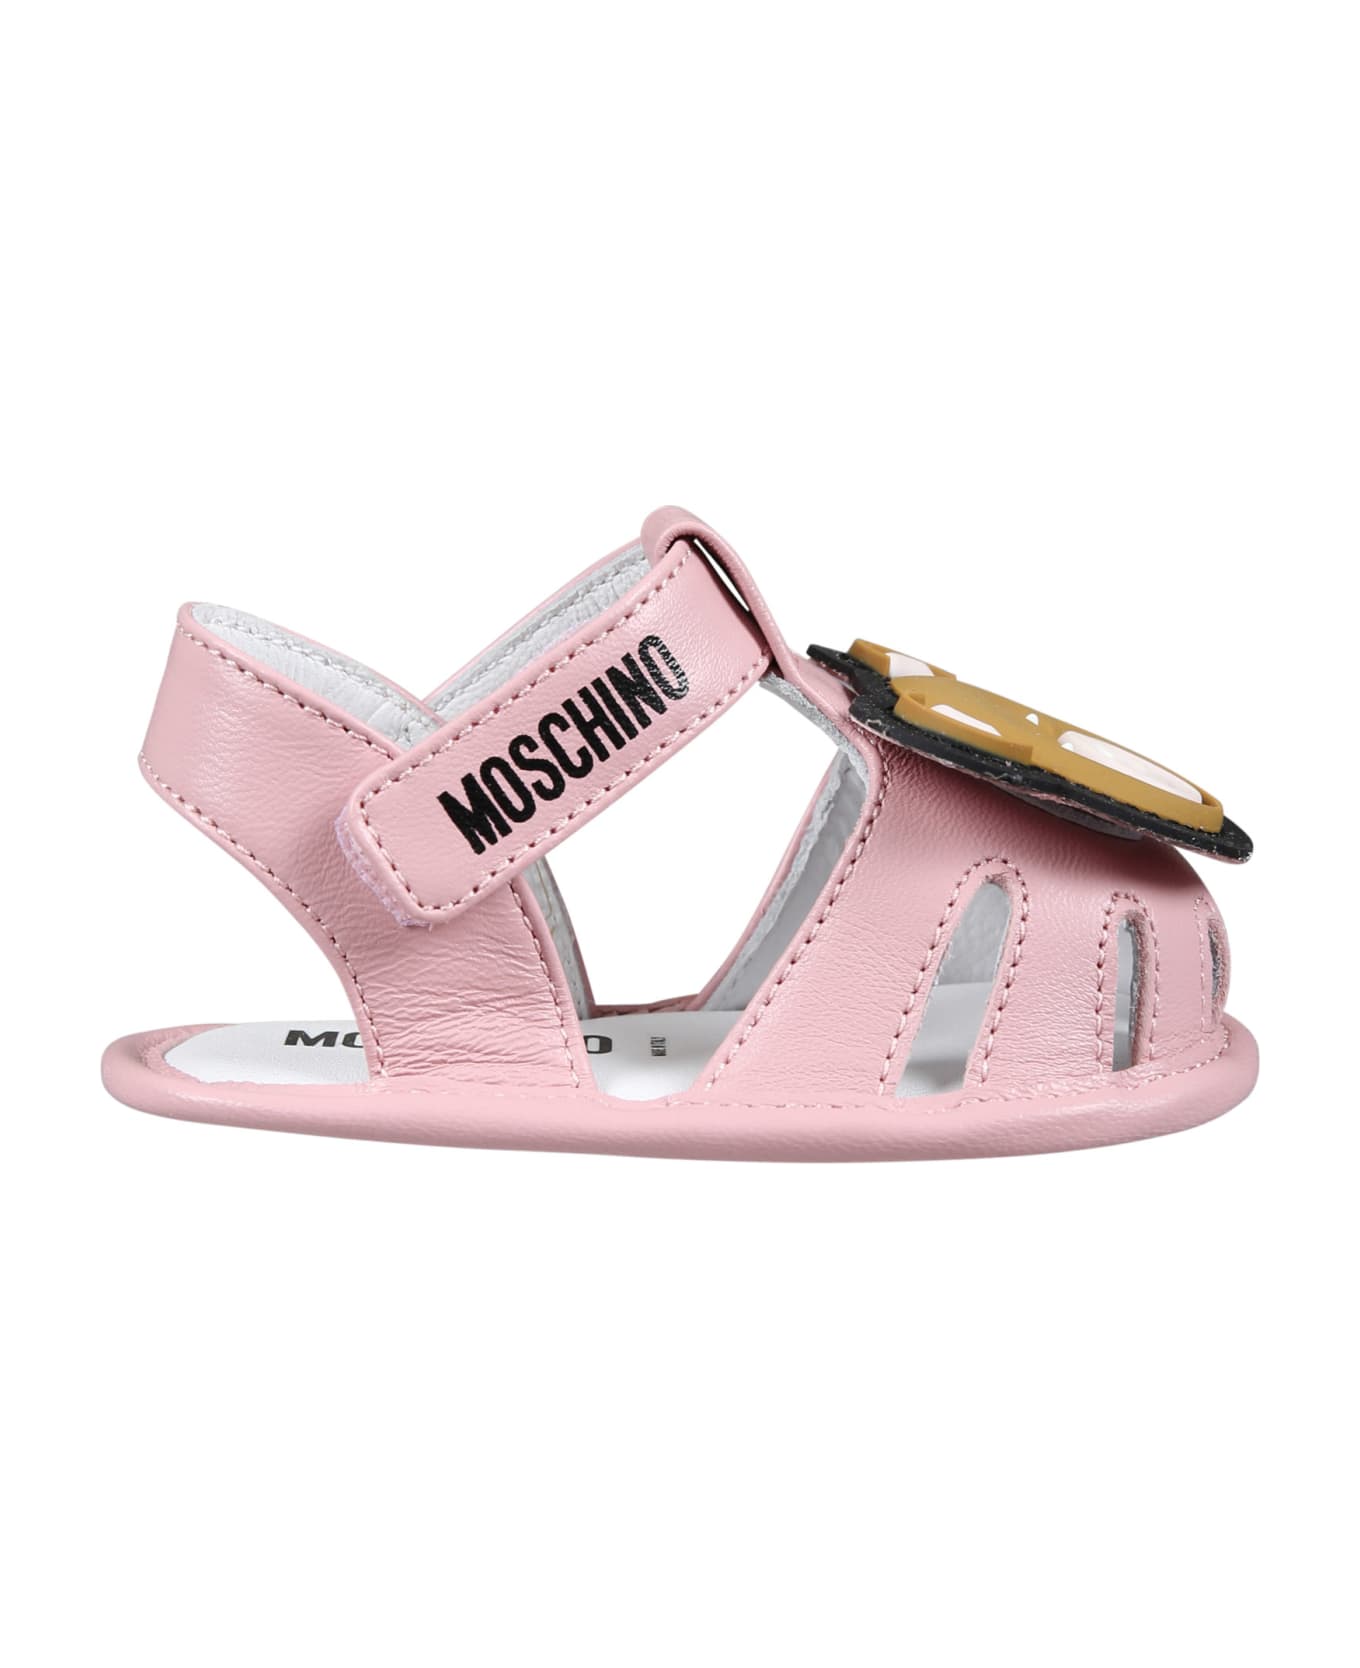 Moschino Pink Sandals For Baby Girl With Teddy Bear - Pink